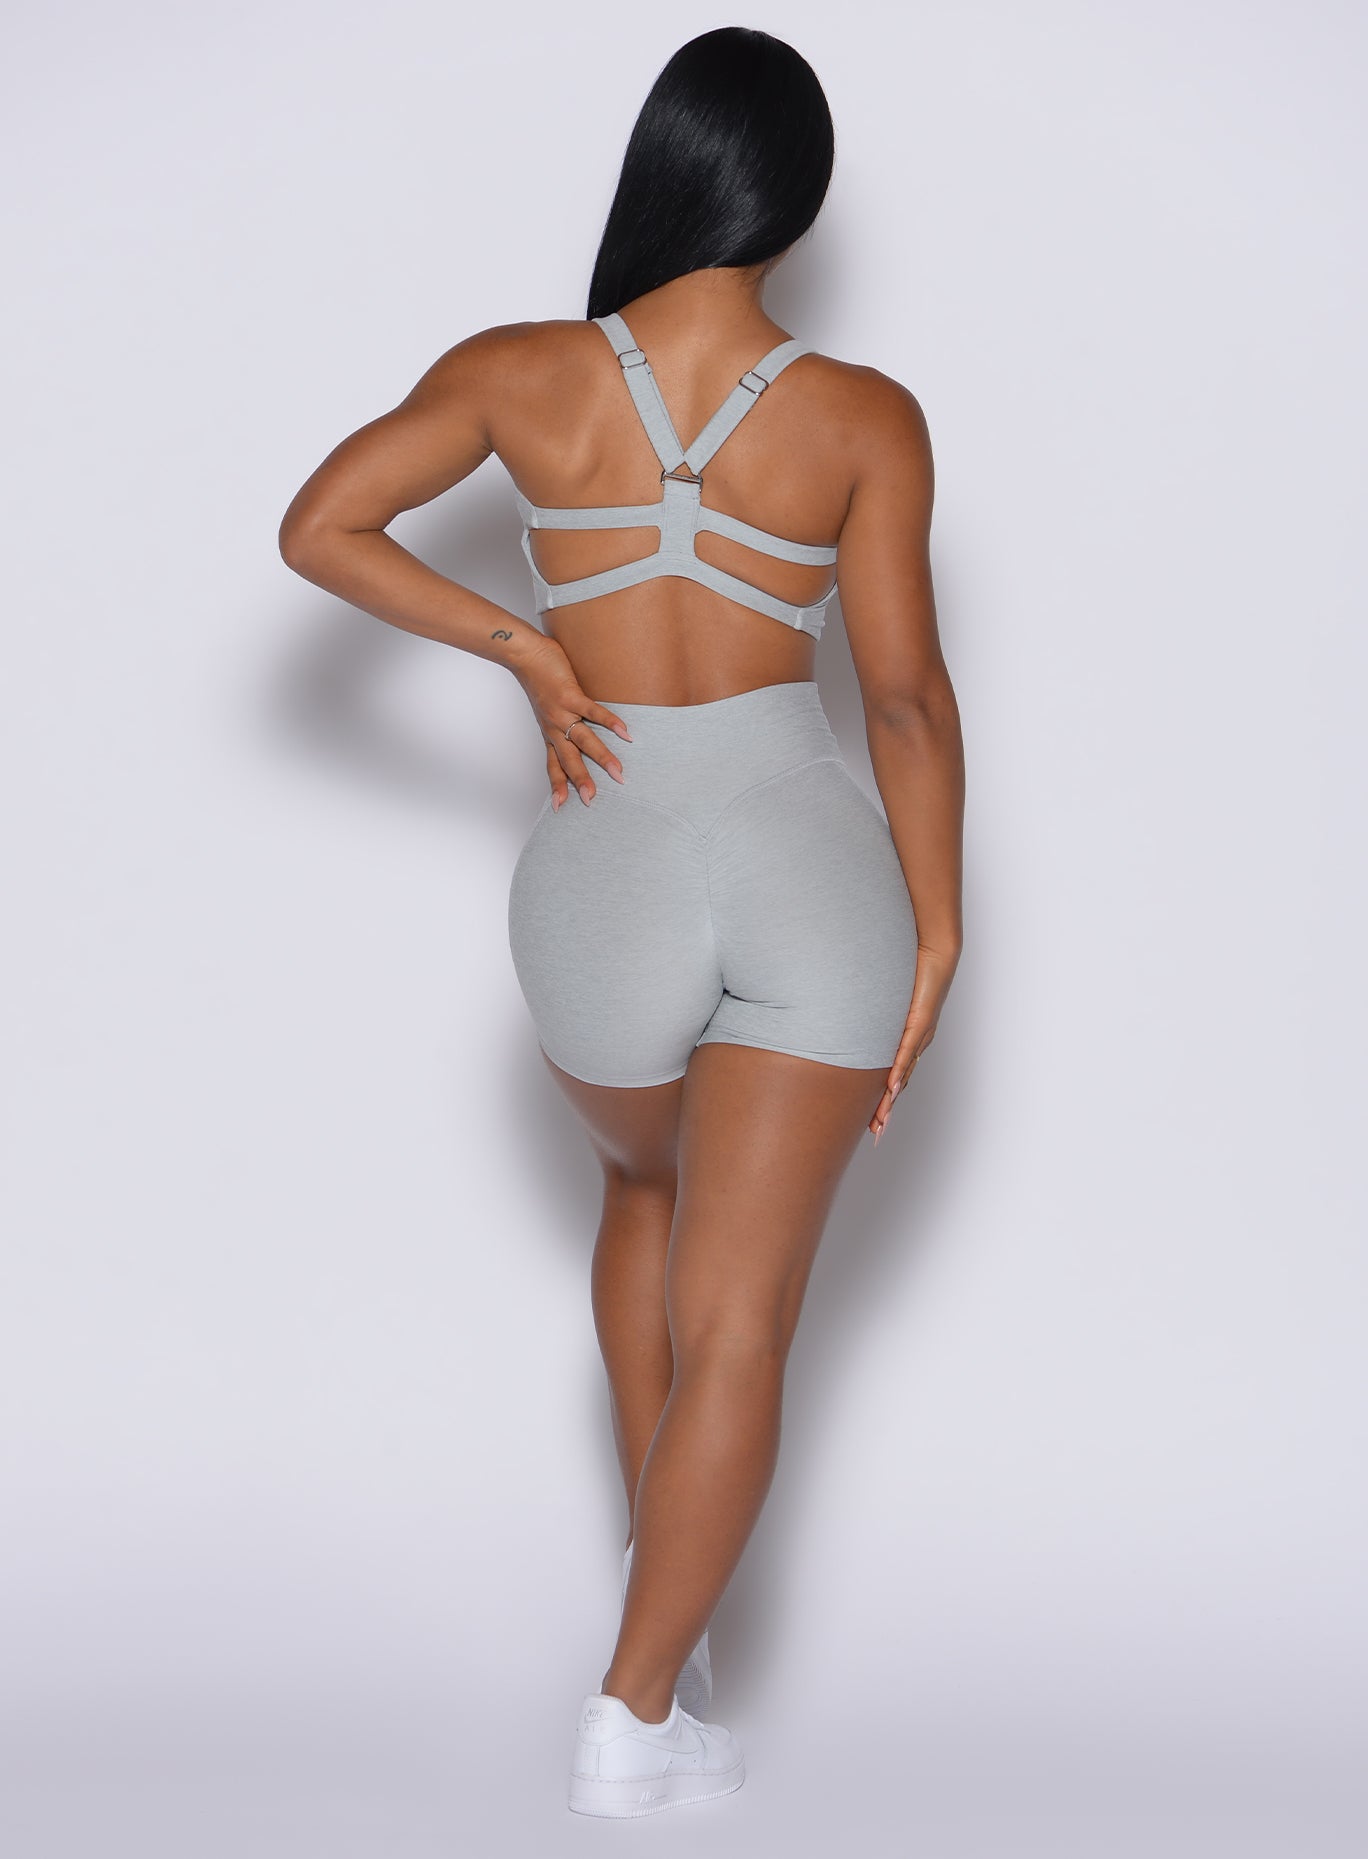 back profile of model wearing the Tiny Waist Shorts in Light Cloud color and a matching sports bra